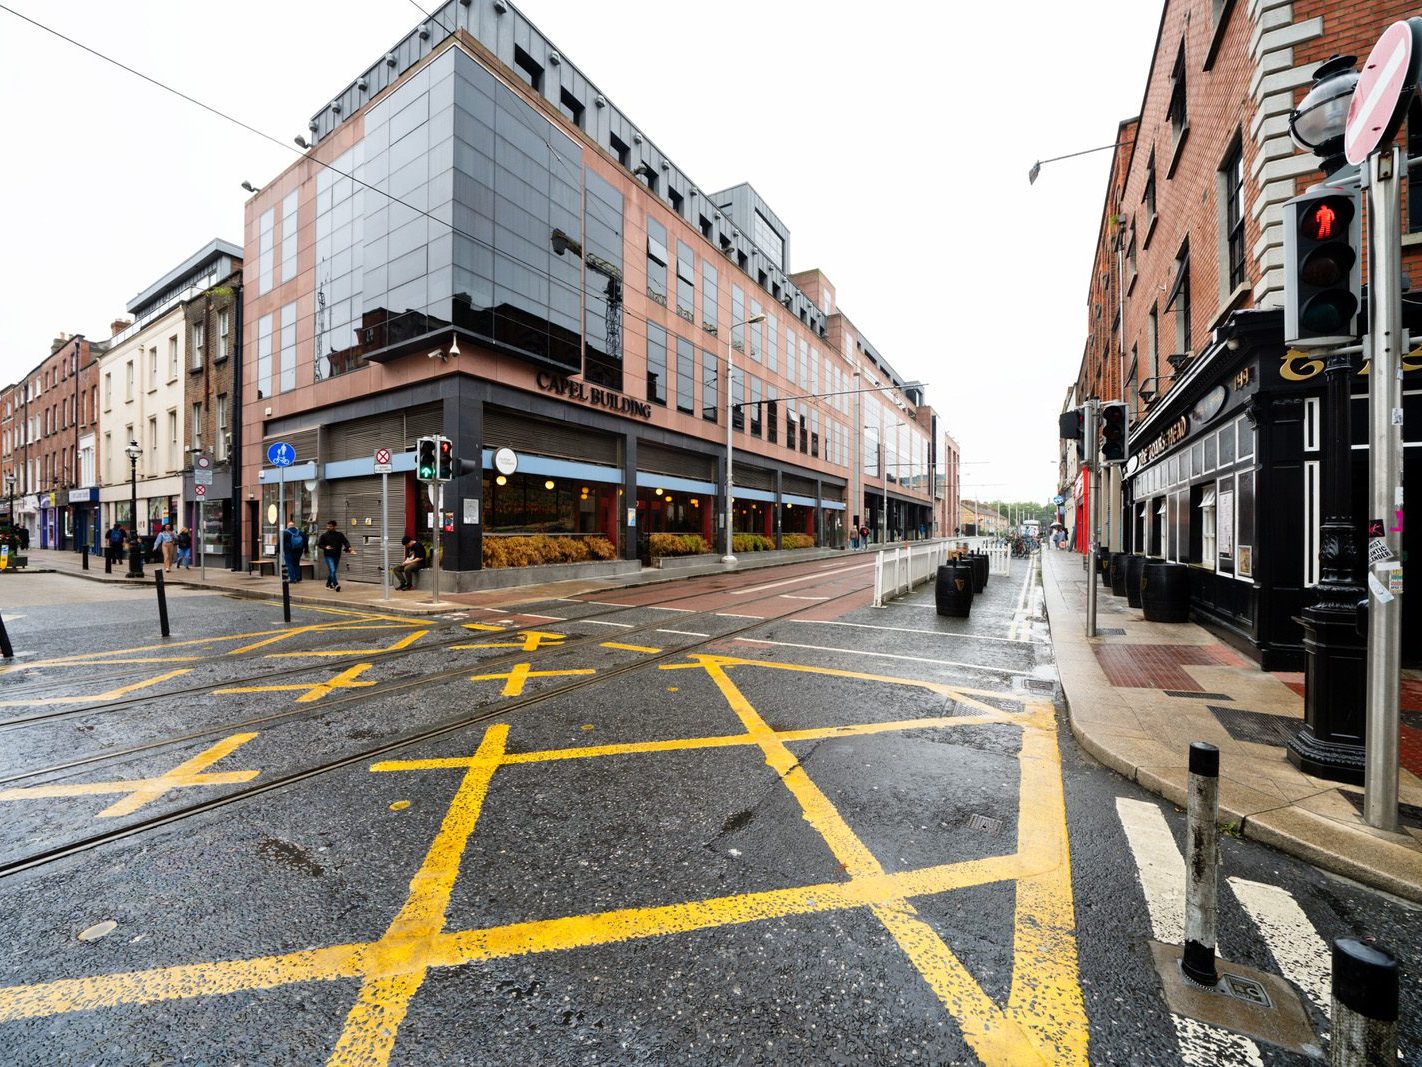 CAPEL STREET ON A DULL WET DAY [INTERIM CAPEL STREET IMPROVEMENT WORKS ARE NOW ONGOING] 020